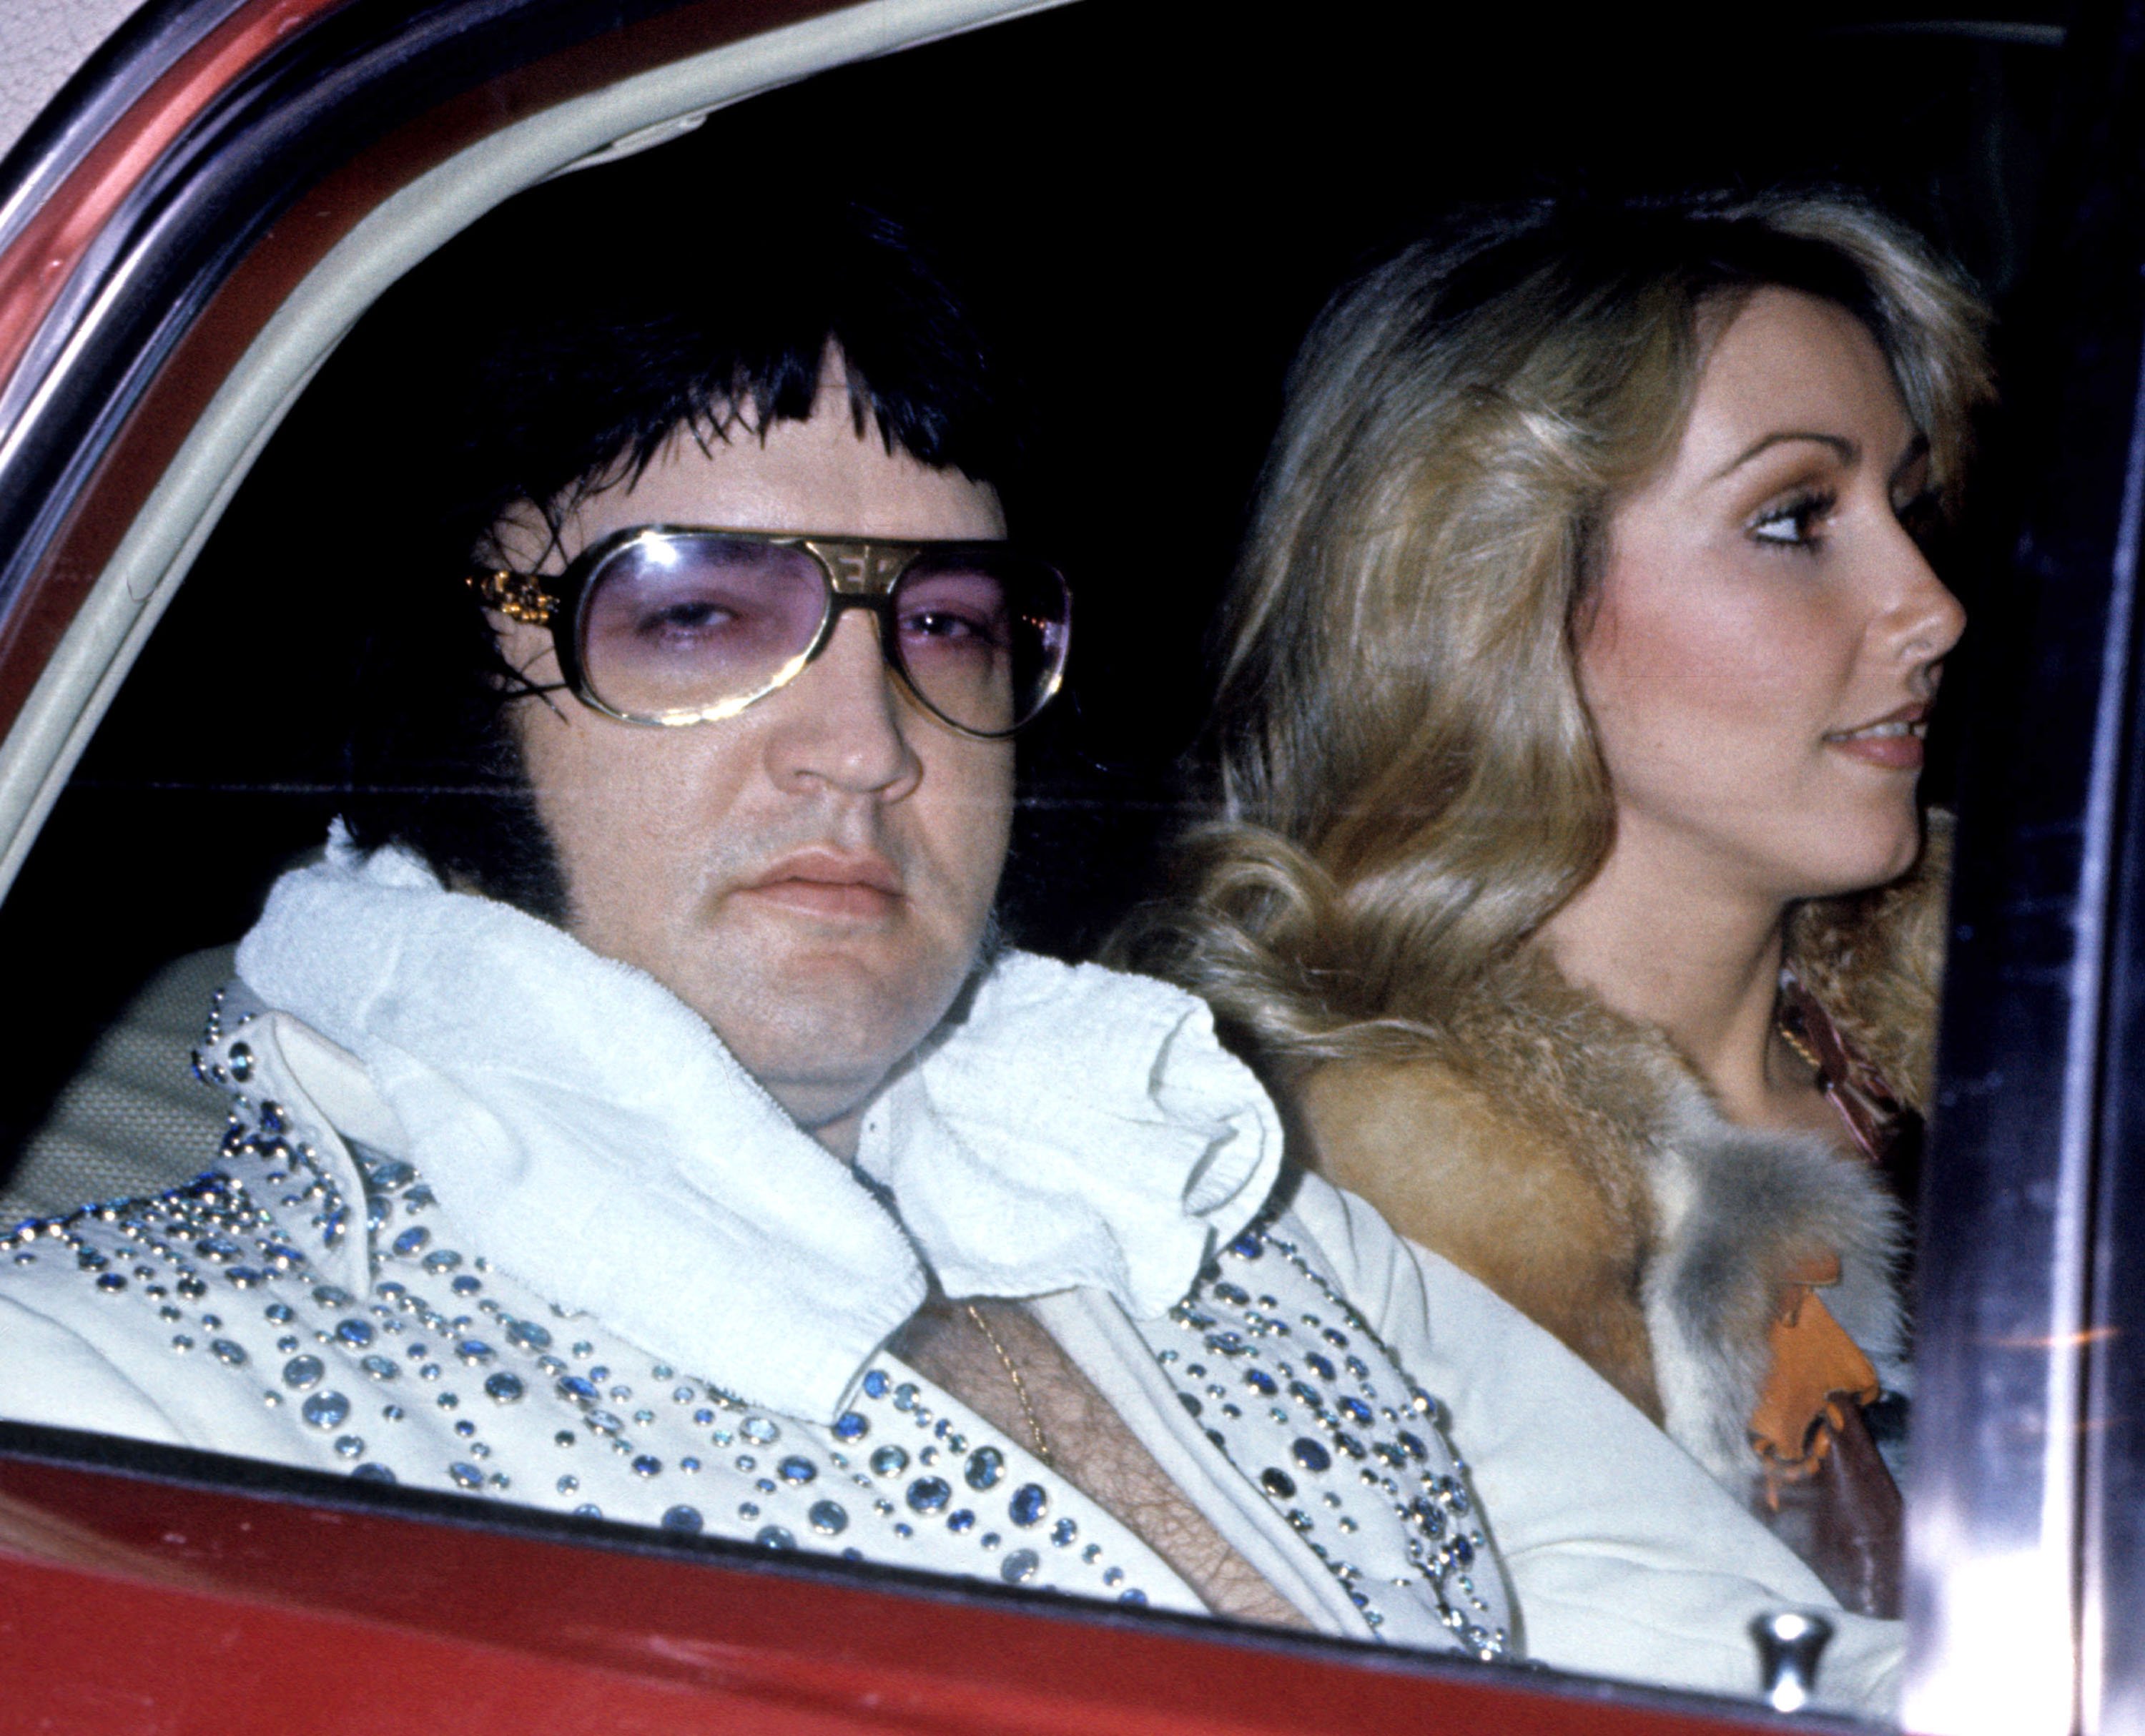 Elvis Presley with girlfriend songwriter Linda Thompson arrive at the Hilton Hotel on March 21, 1976 in Cincinnati, Ohio ┃ Source: Getty Images